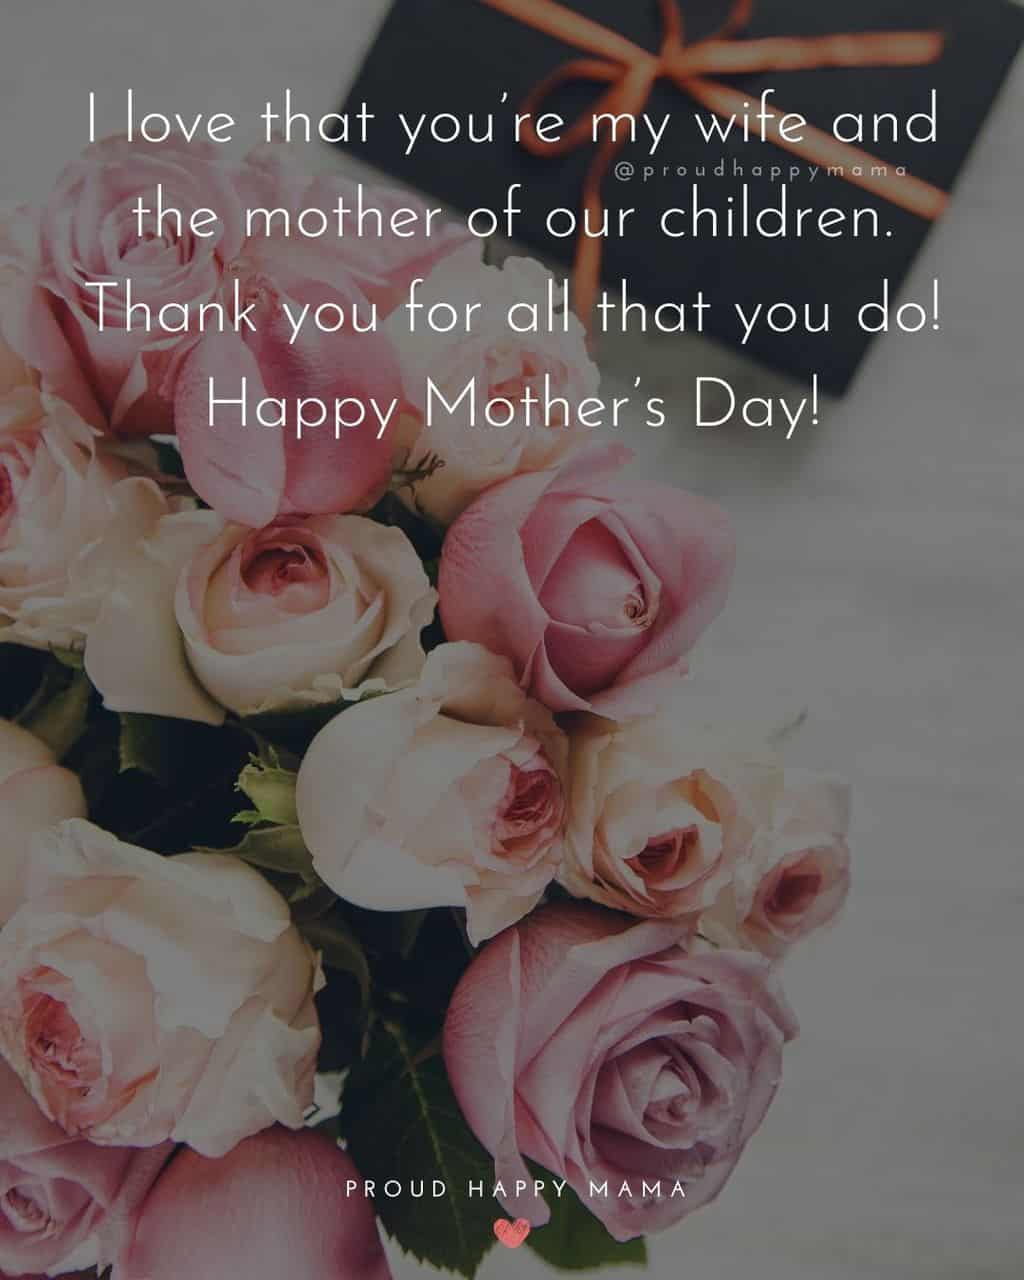 Happy Mothers Day Quotes For Wife - I love that you’re my wife and the mother of our children. Thank you for all that you do!